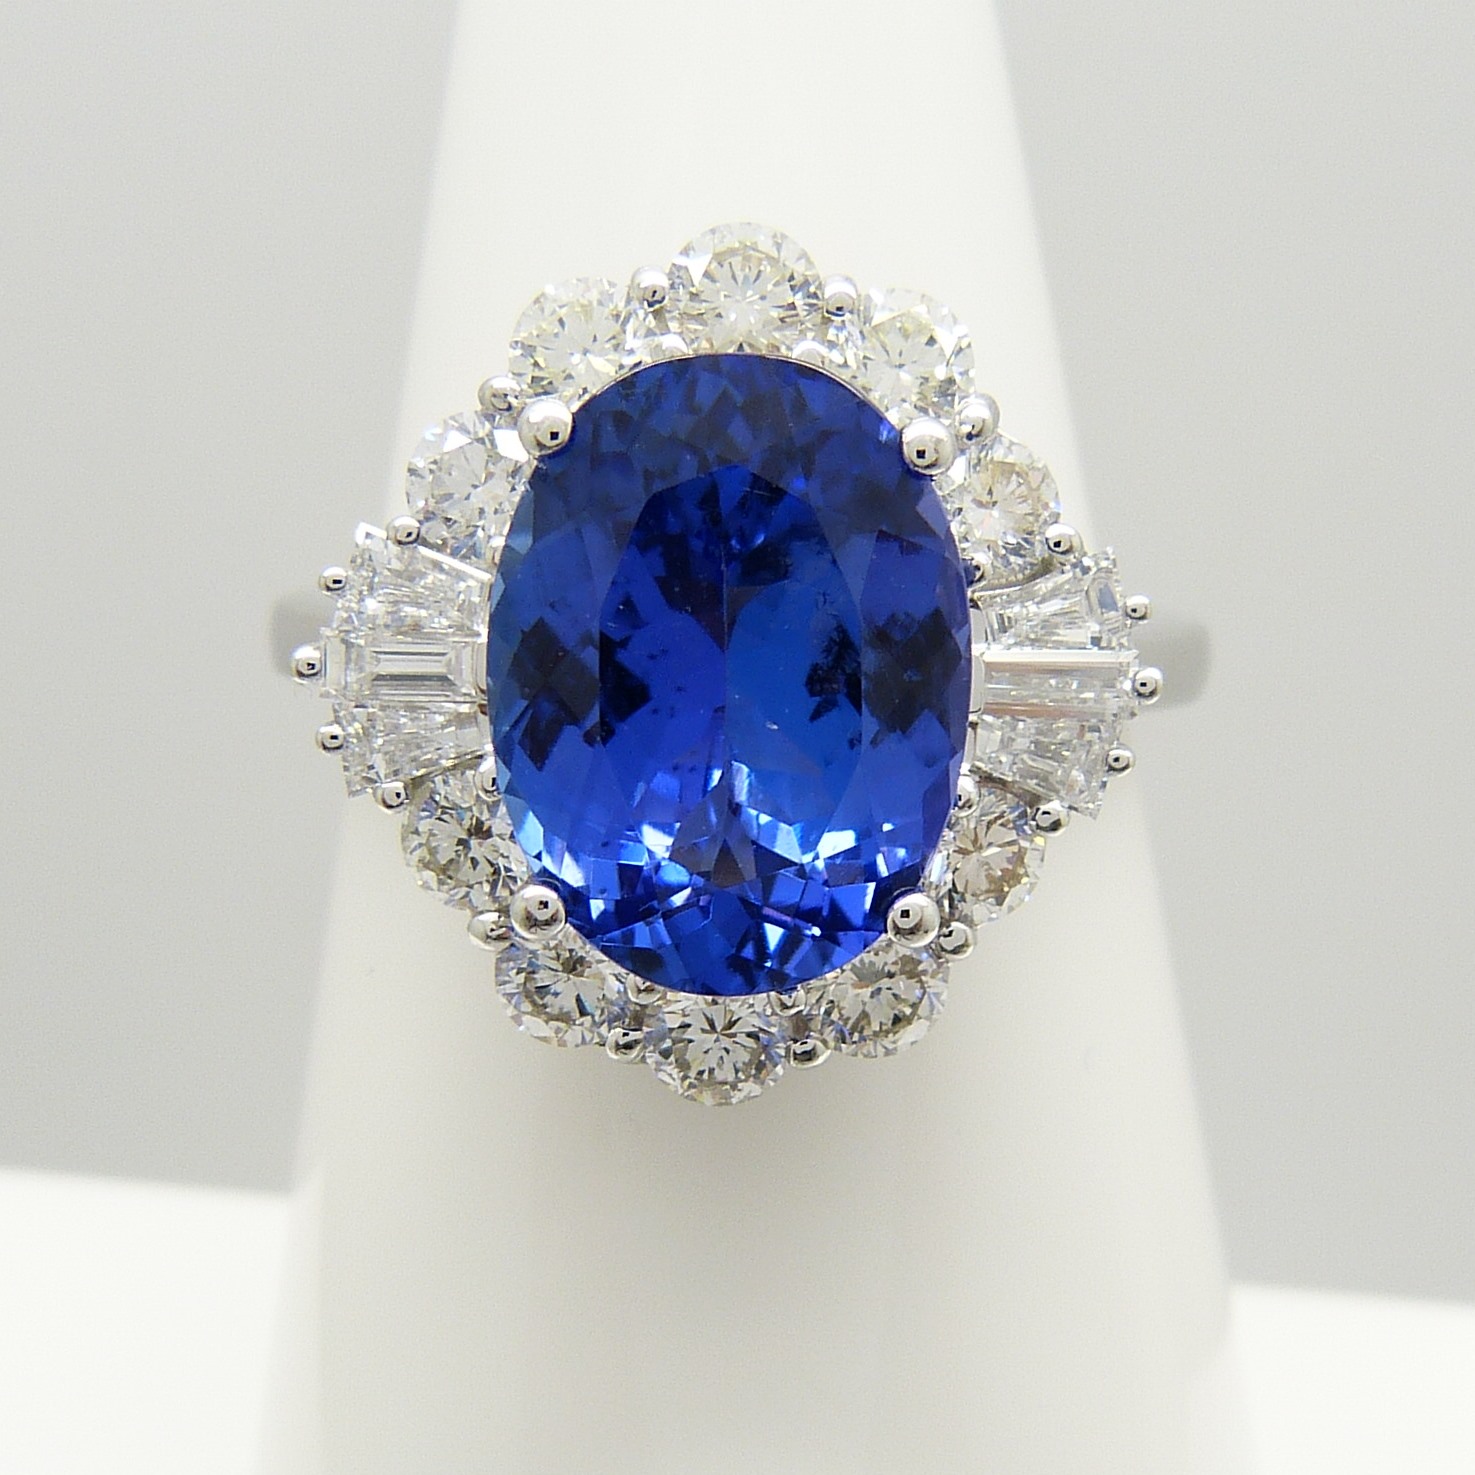 A stunning, certificated loupe-clean large tanzanite and diamond statement ring in 18ct white gold - Image 2 of 9